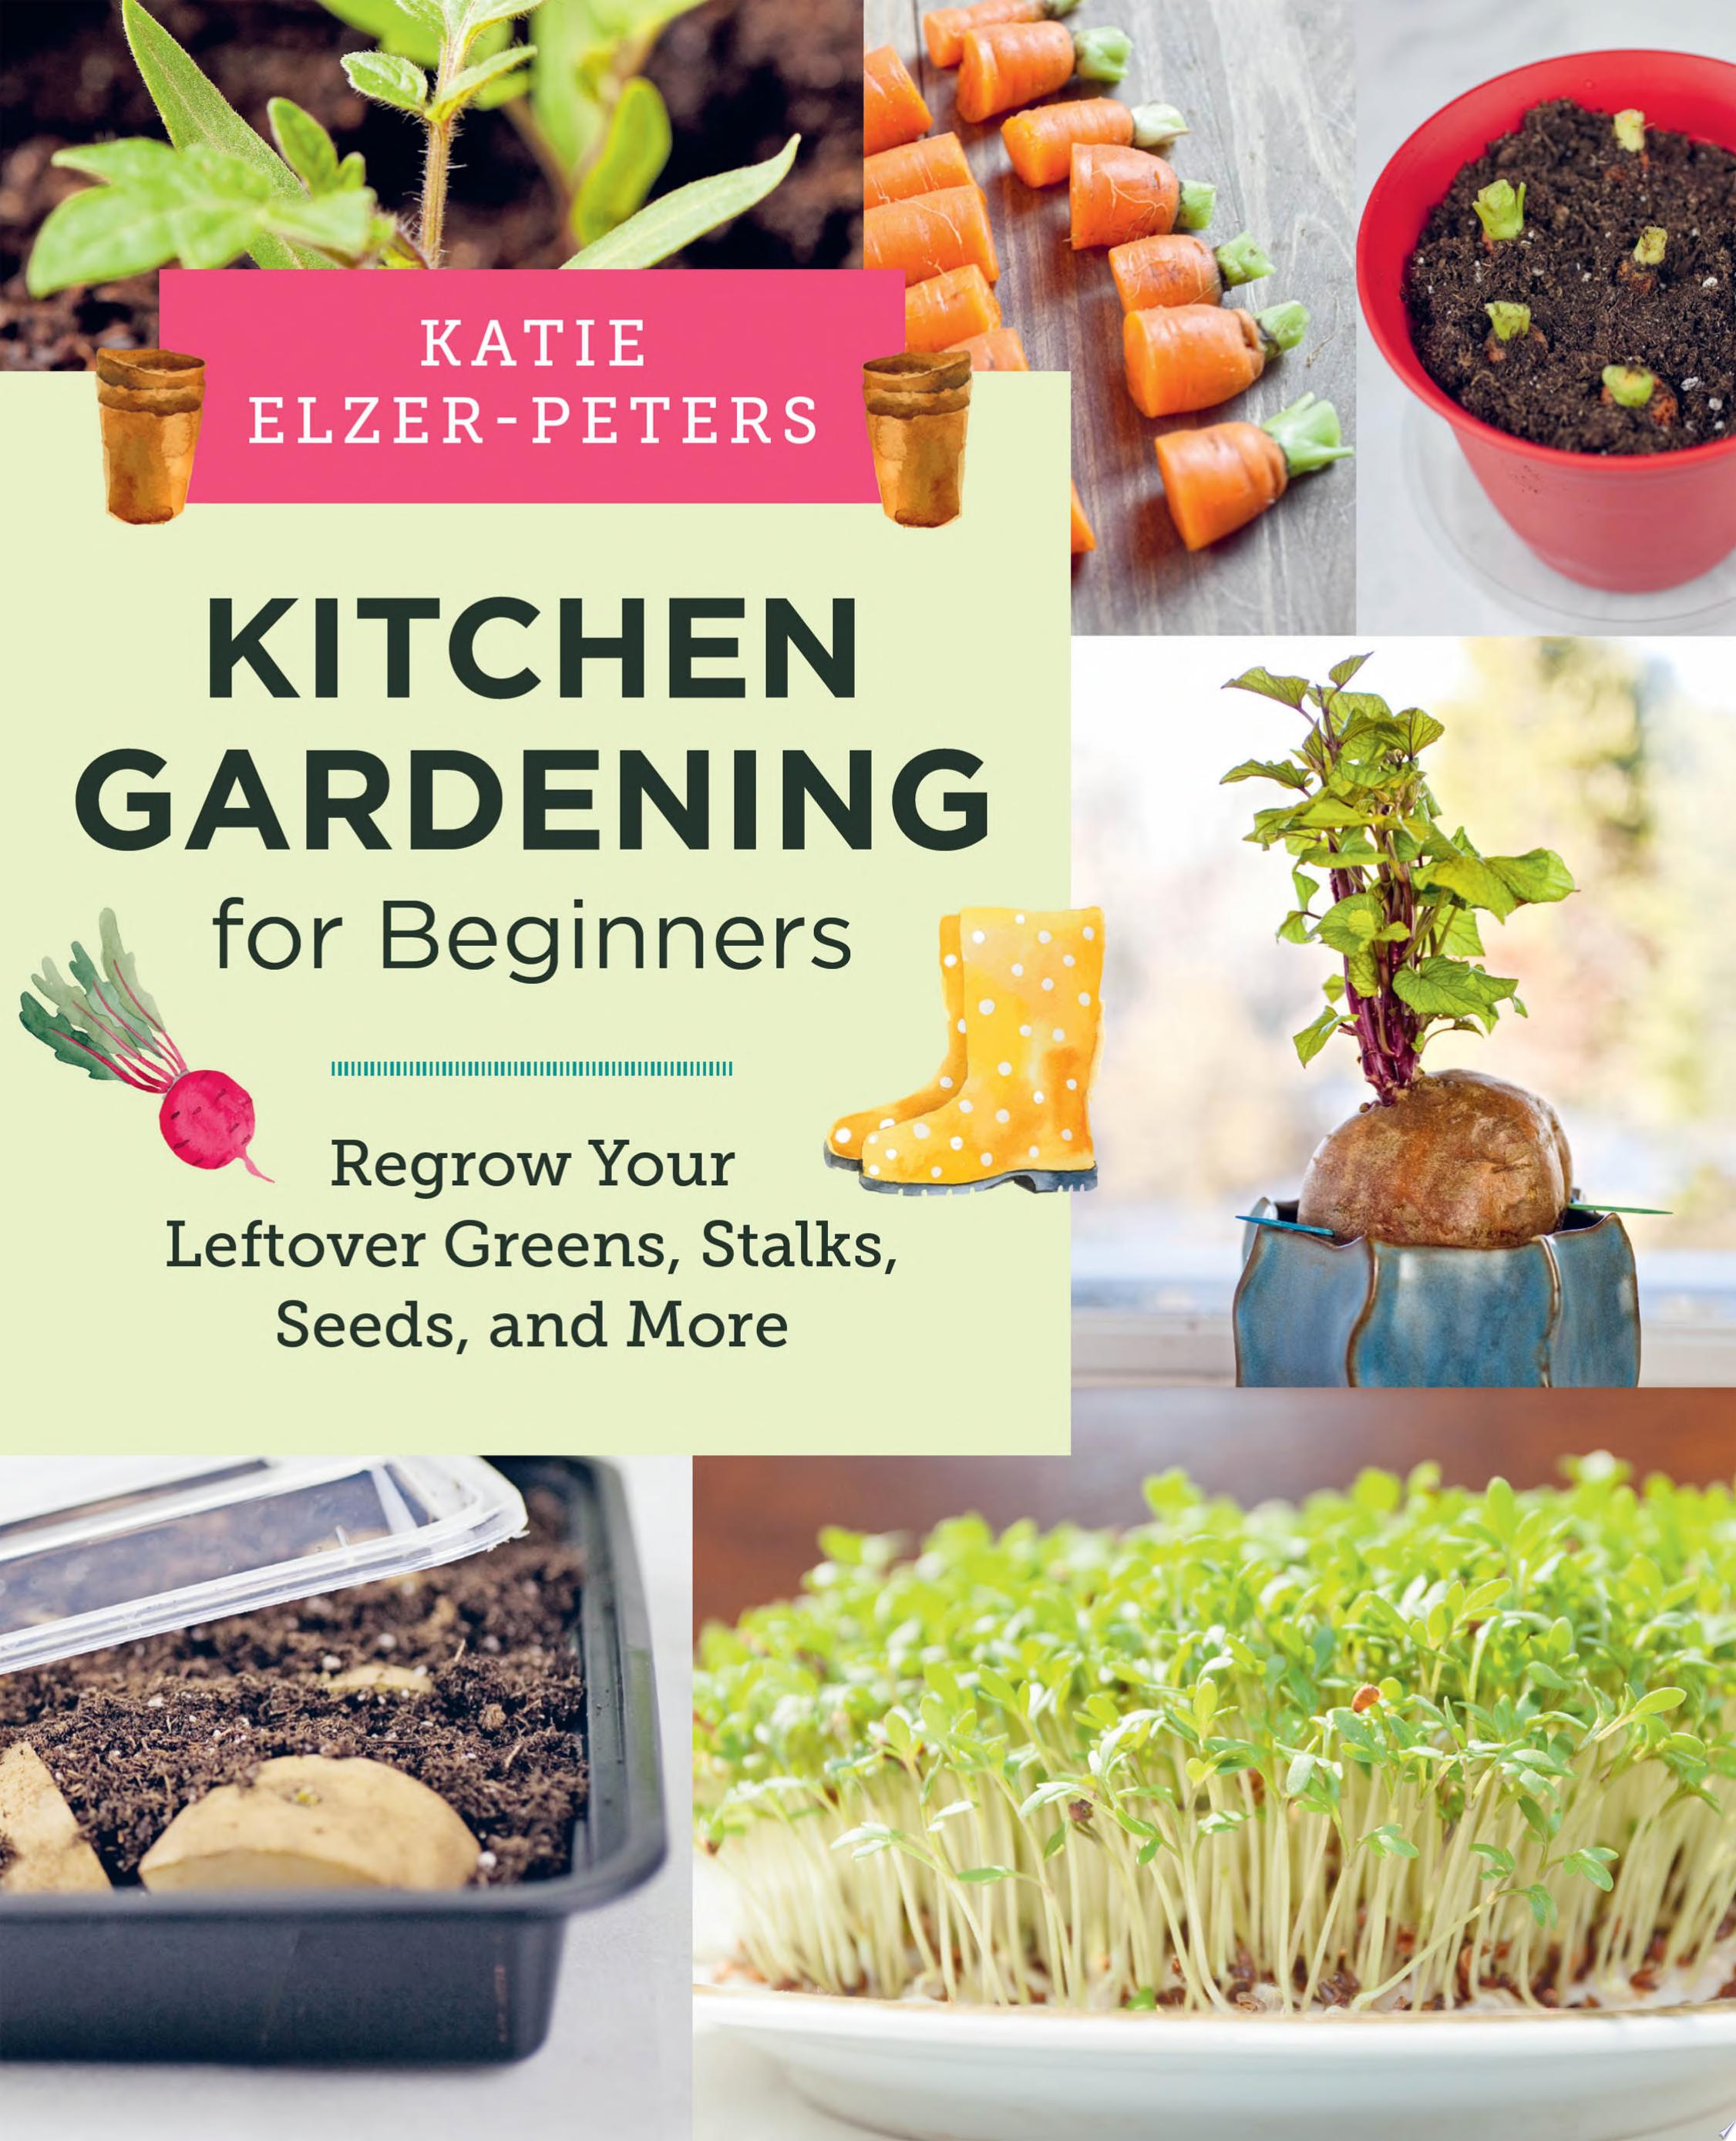 Image for "Kitchen Gardening for Beginners"